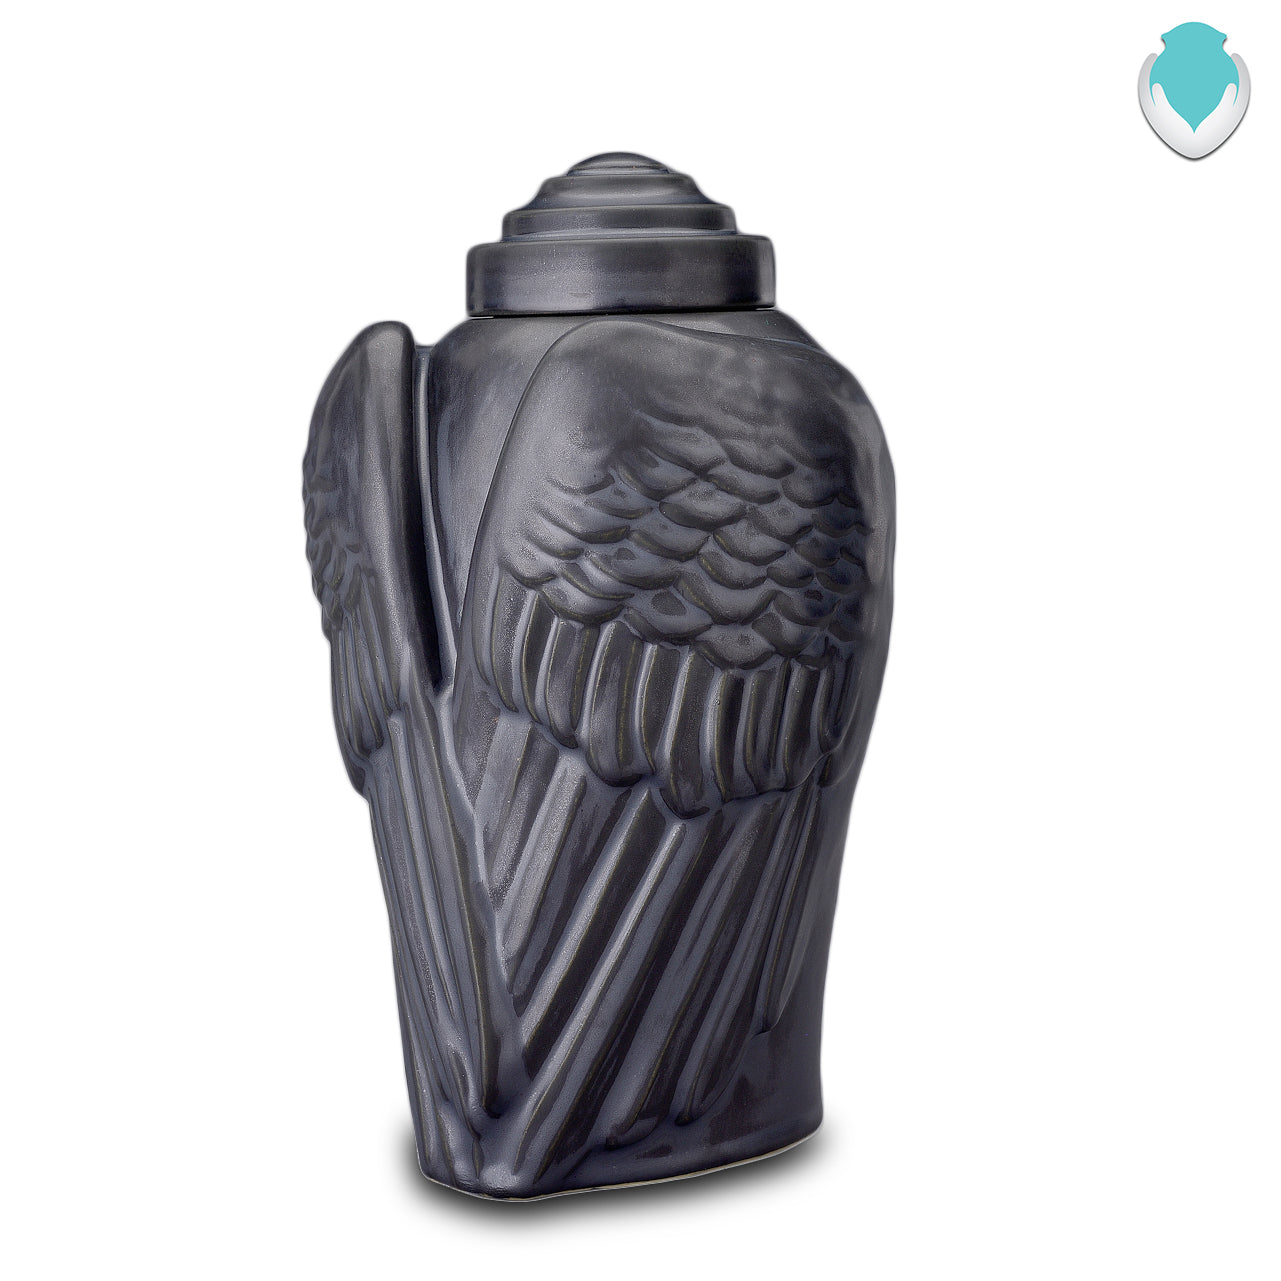 Adult Harmony Wings Cremation Urn for Ashes - Black Matte